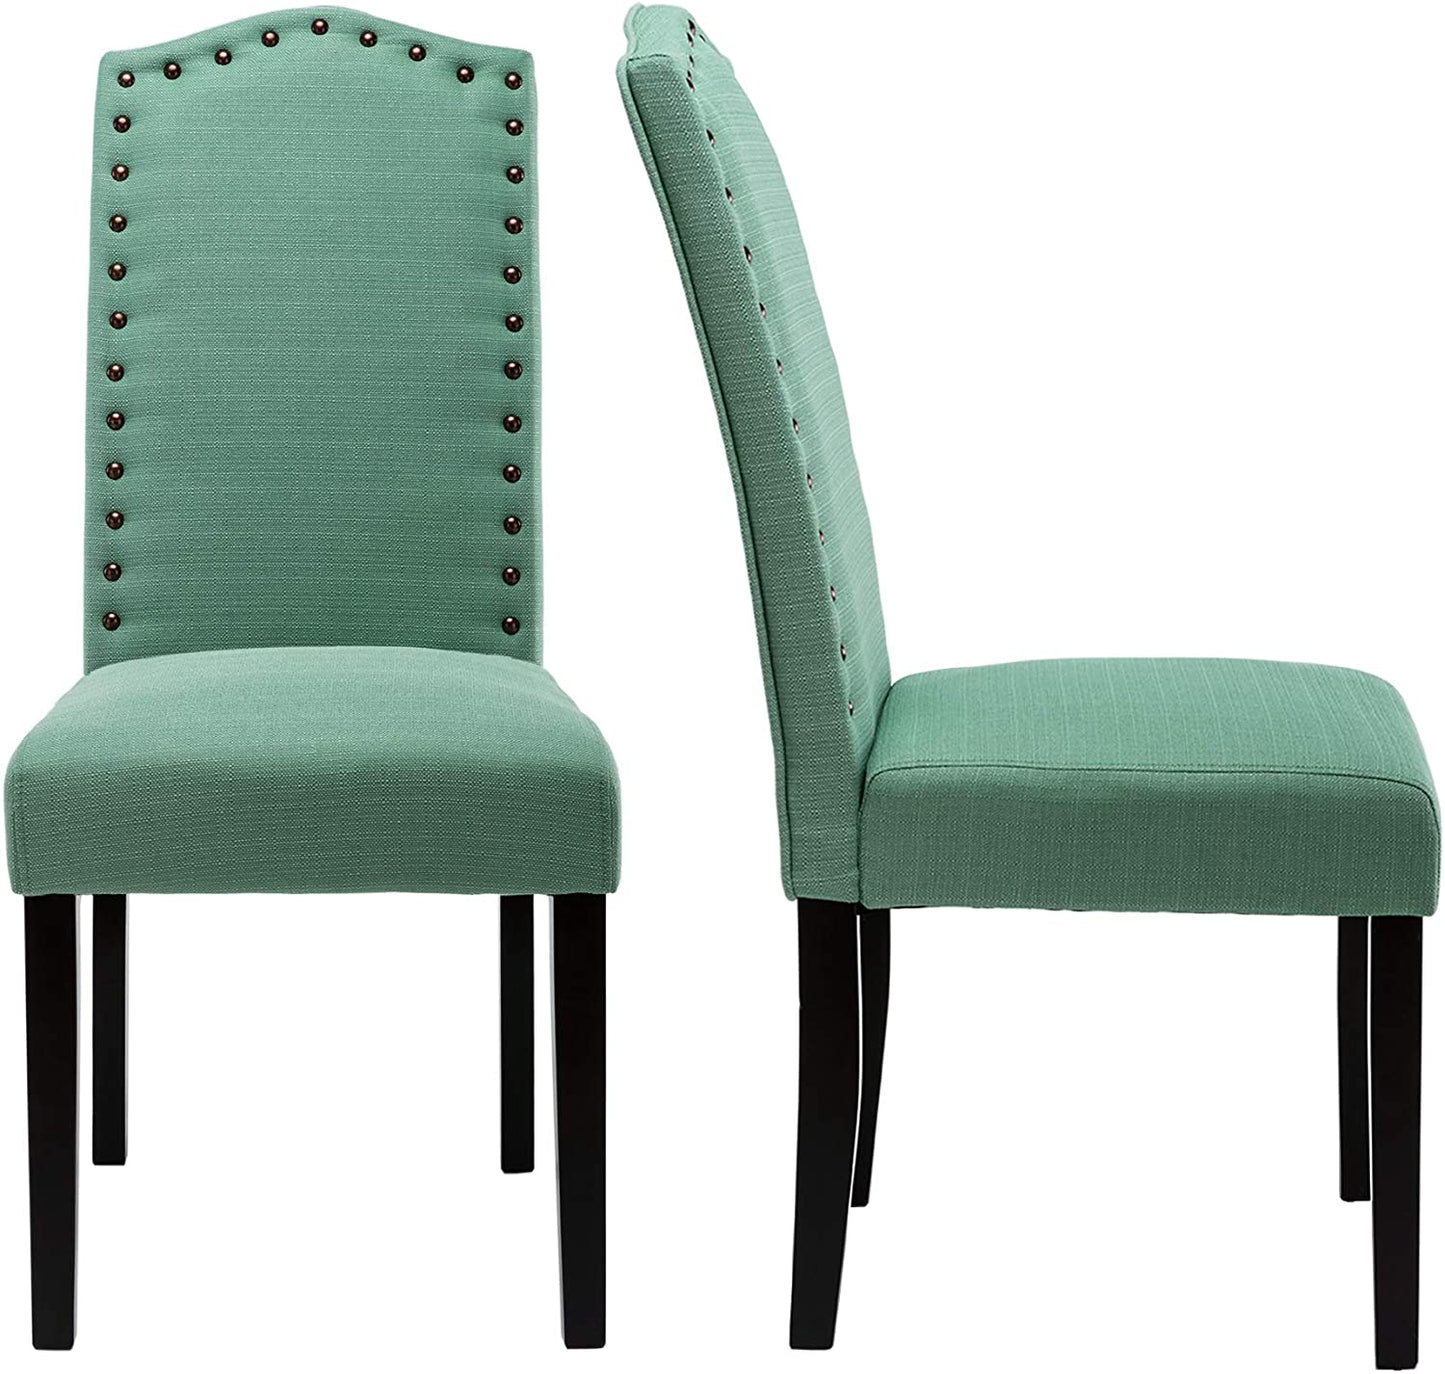 Set of 2 Luxurious Fabric Dining Chairs with Copper Nails and Solid Wood Legs (Light Gray)